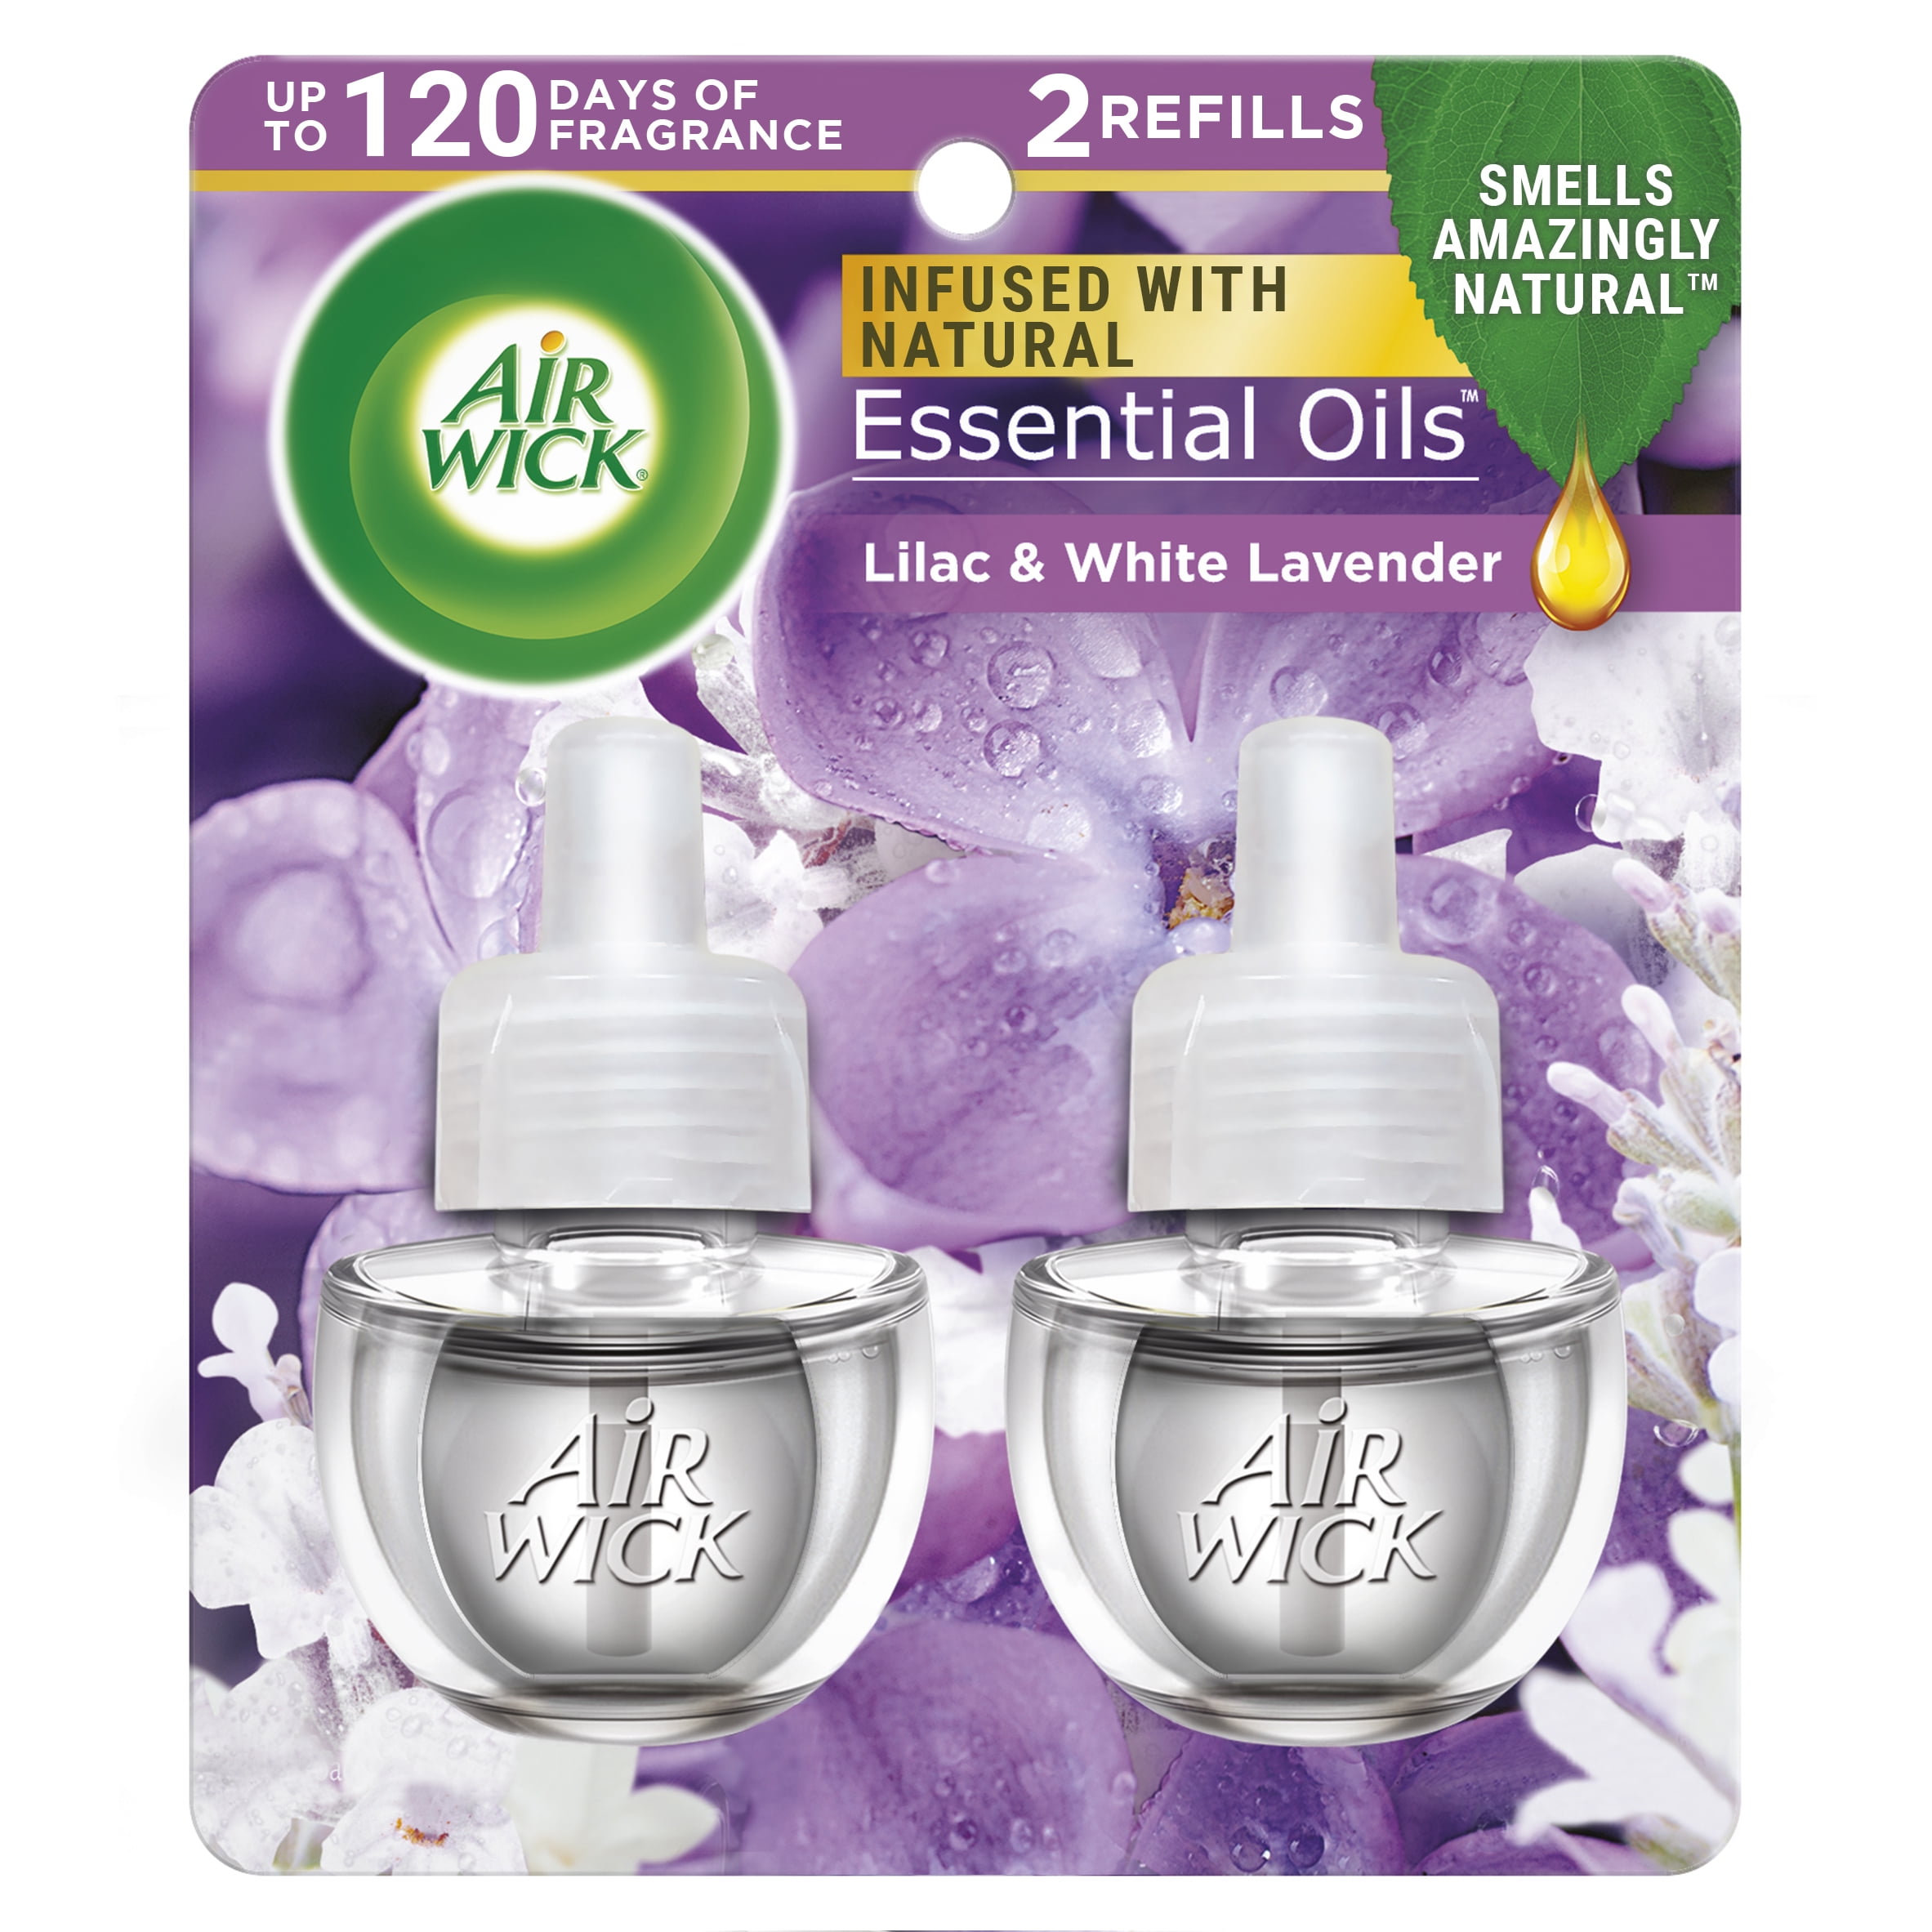 Air Wick Plug in Scented Oil Refill, 2 ct, Lilac & White Lavender, Air Freshener, Essential Oils